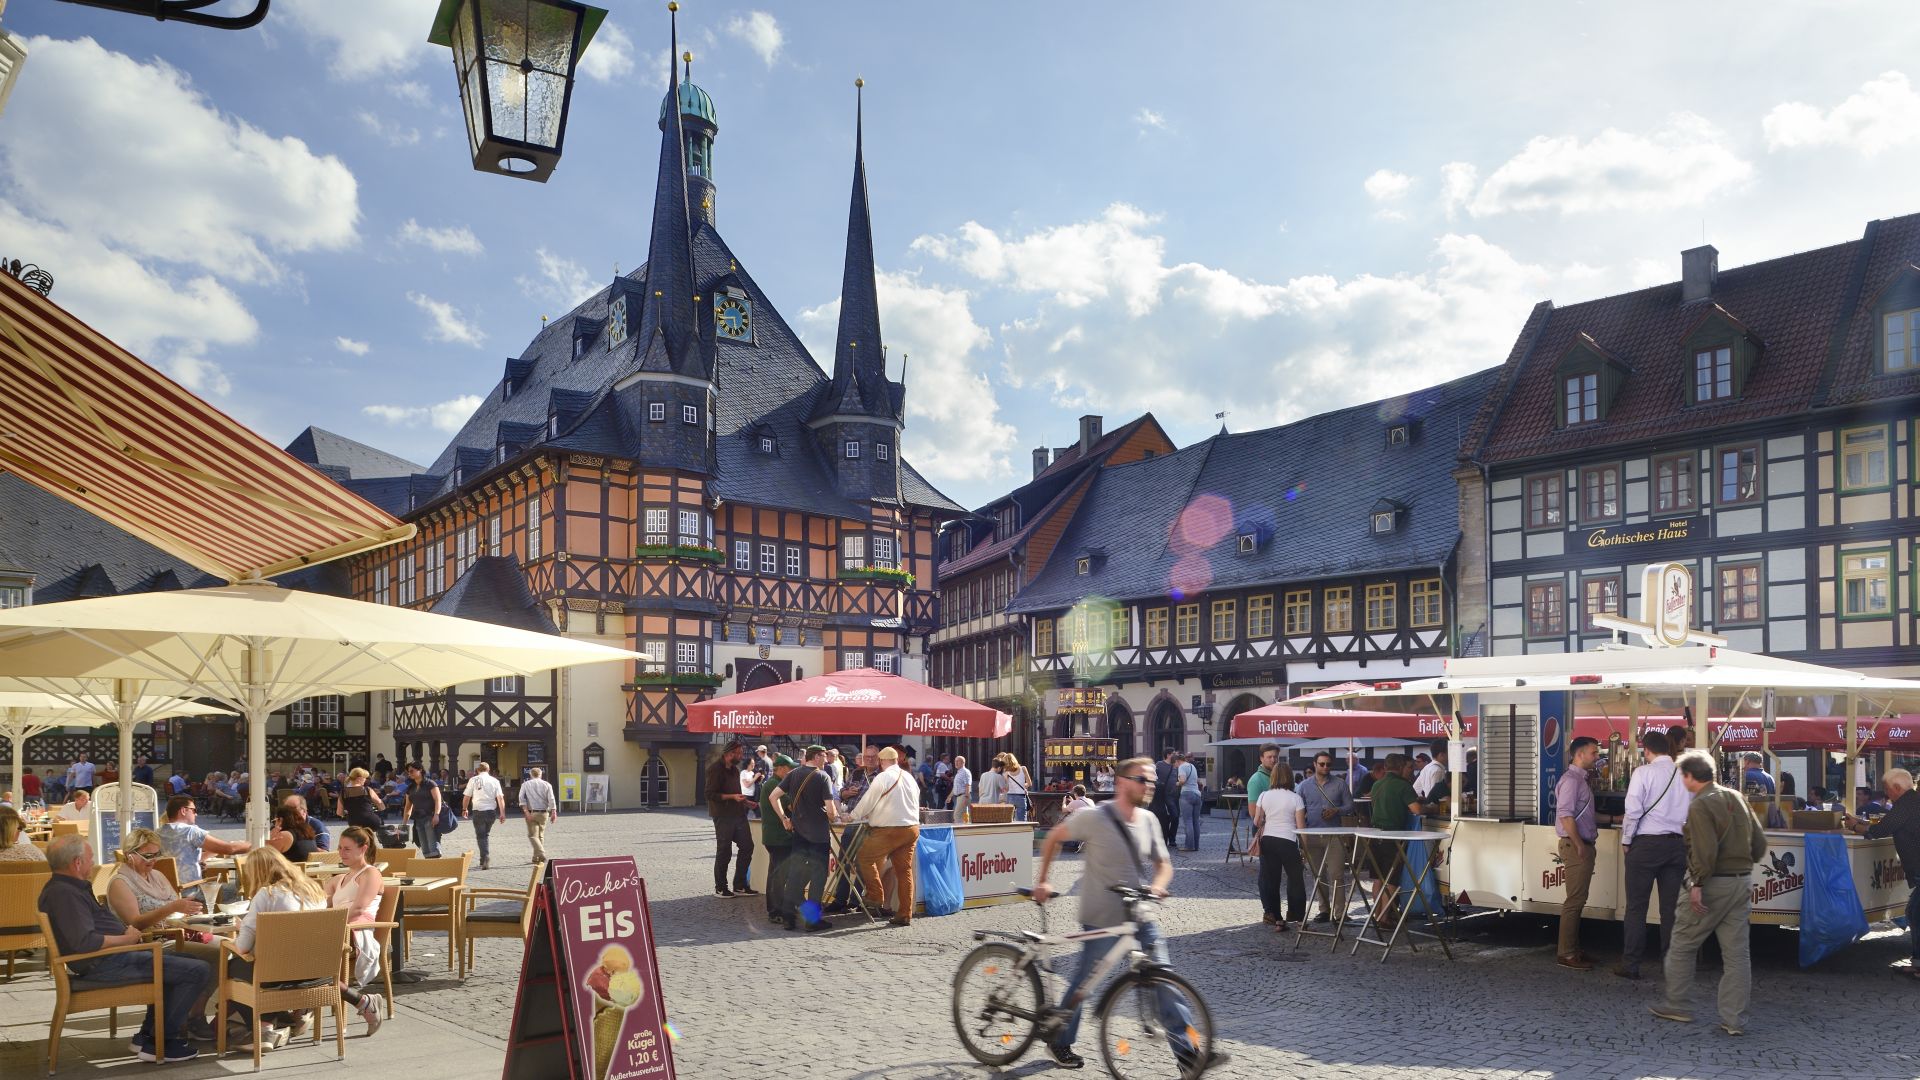 Wernigerode: Town Hall with Market Square